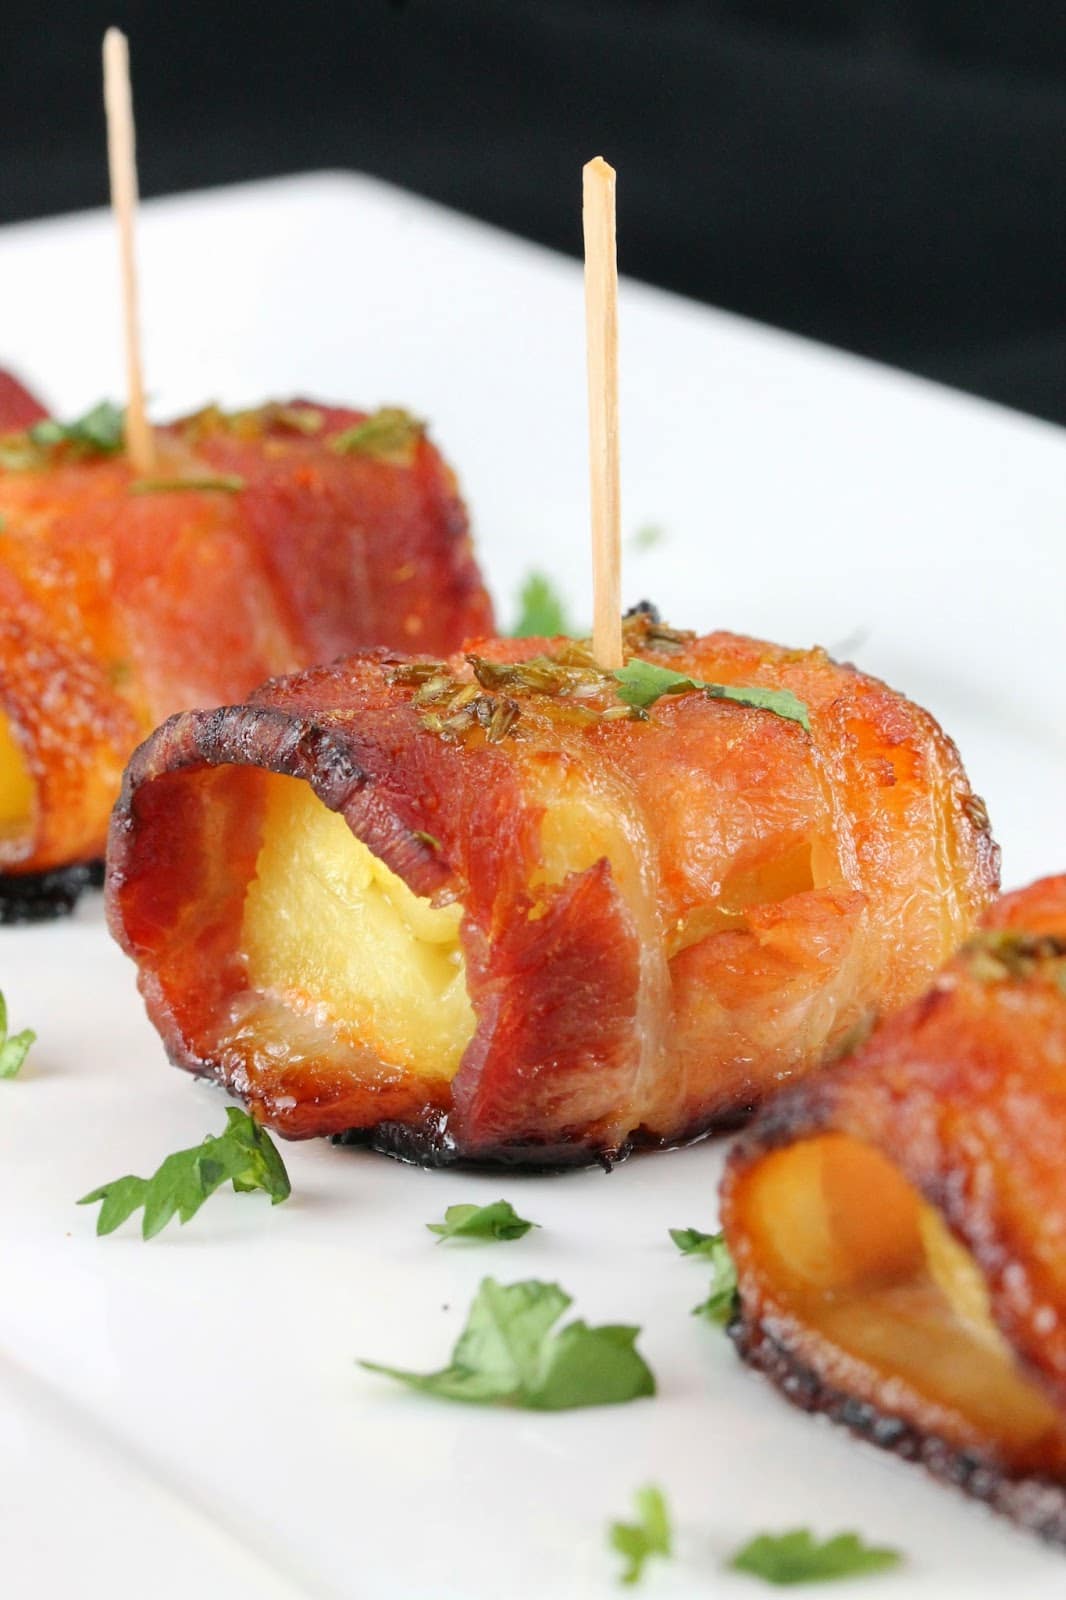 Sriracha Honey Glazed Bacon Wrapped Pineapple stuck together with a toothpick